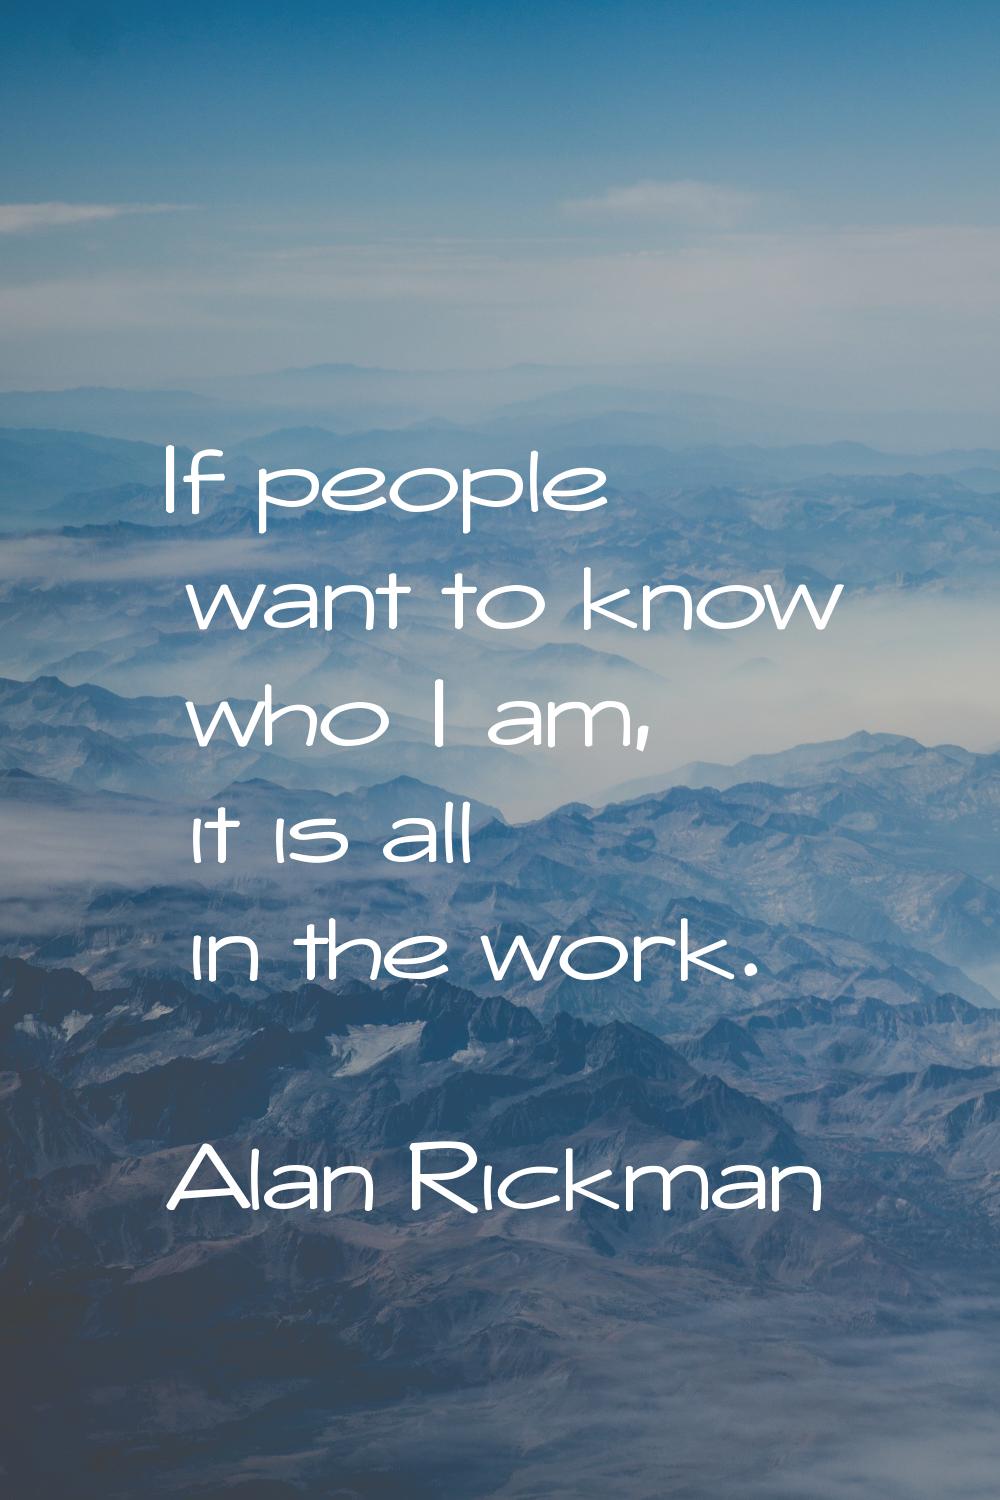 If people want to know who I am, it is all in the work.